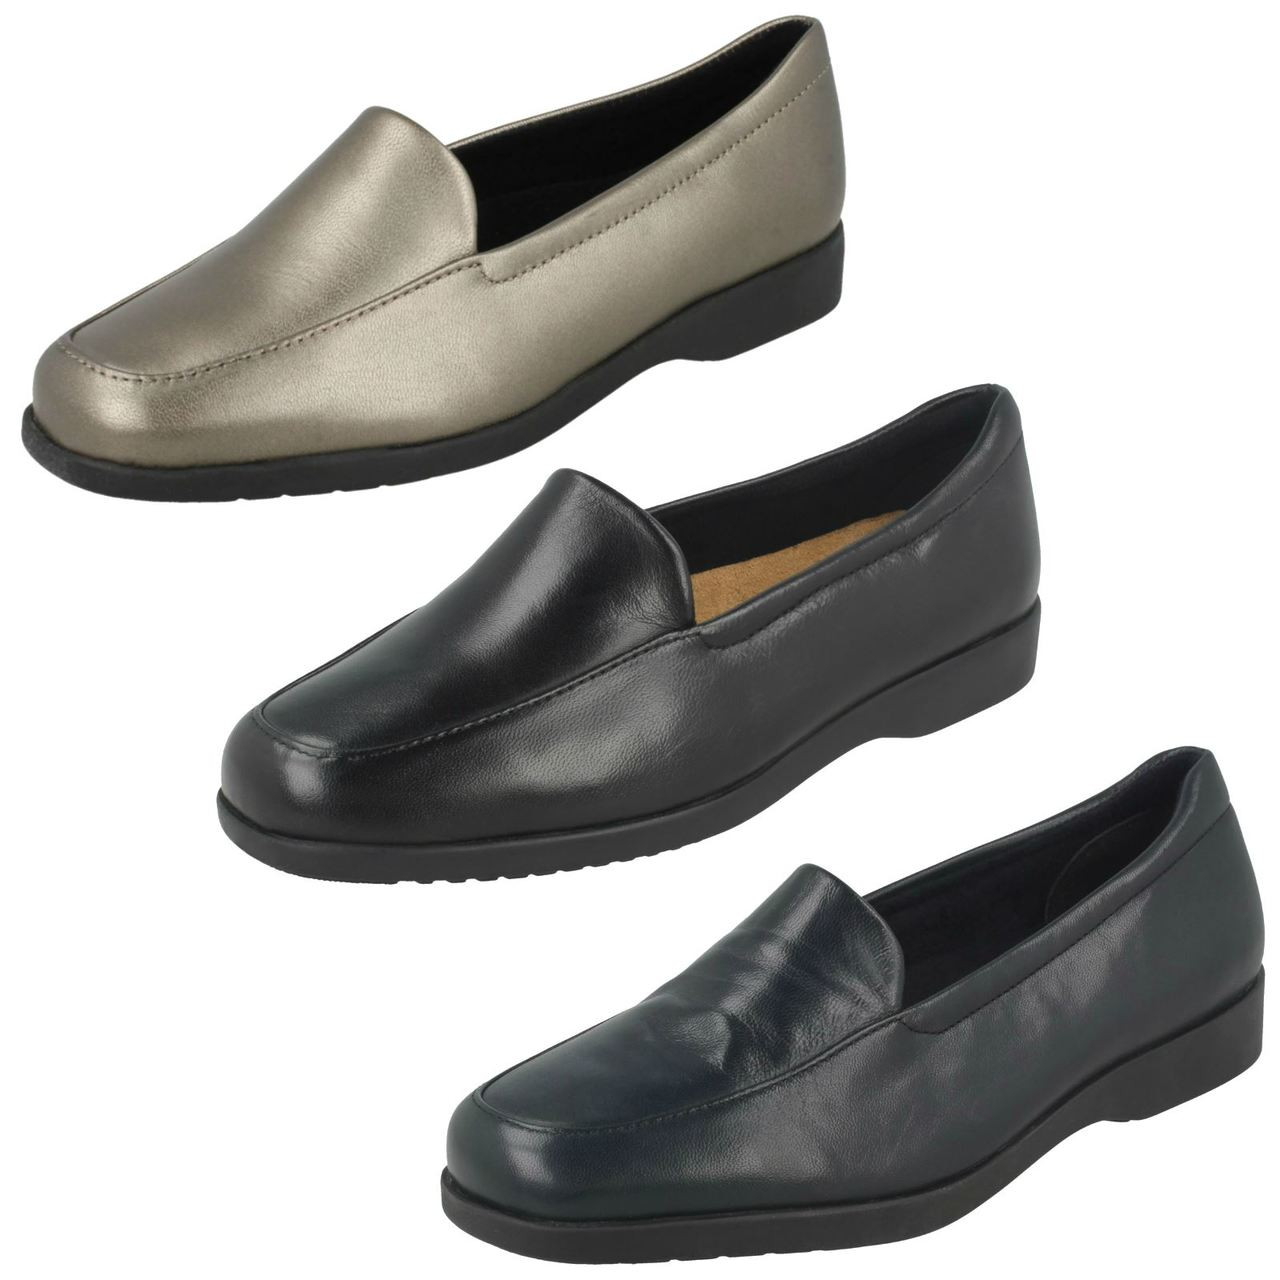 Ladies Loafer Style Shoes Georgia